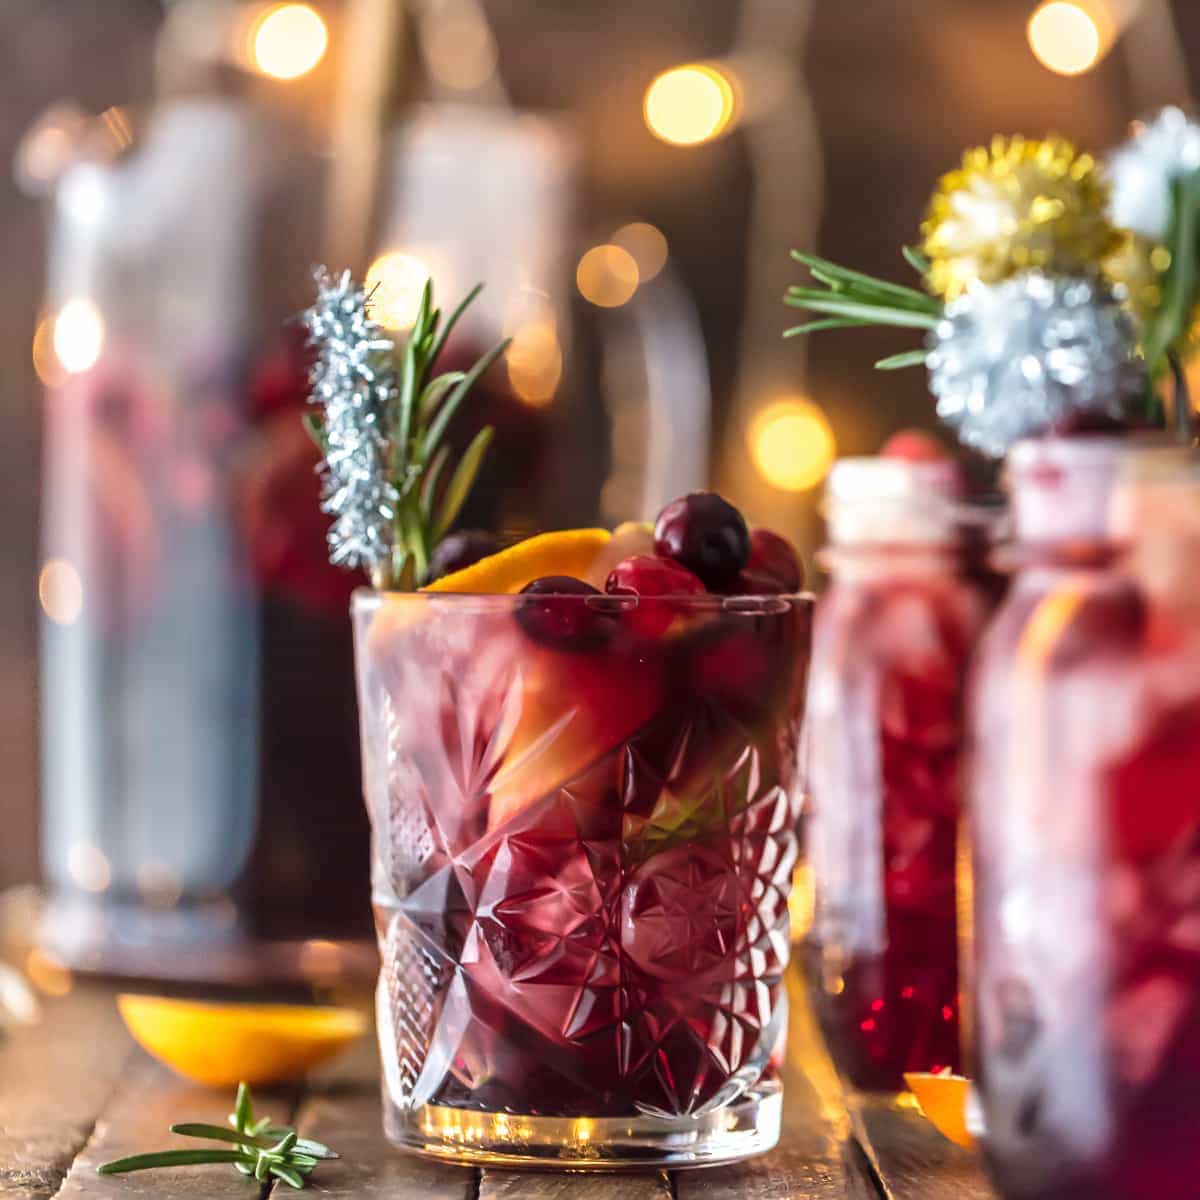 https://www.thecookierookie.com/wp-content/uploads/2016/11/gluten-free-easy-holiday-sangria-4-of-12.jpg